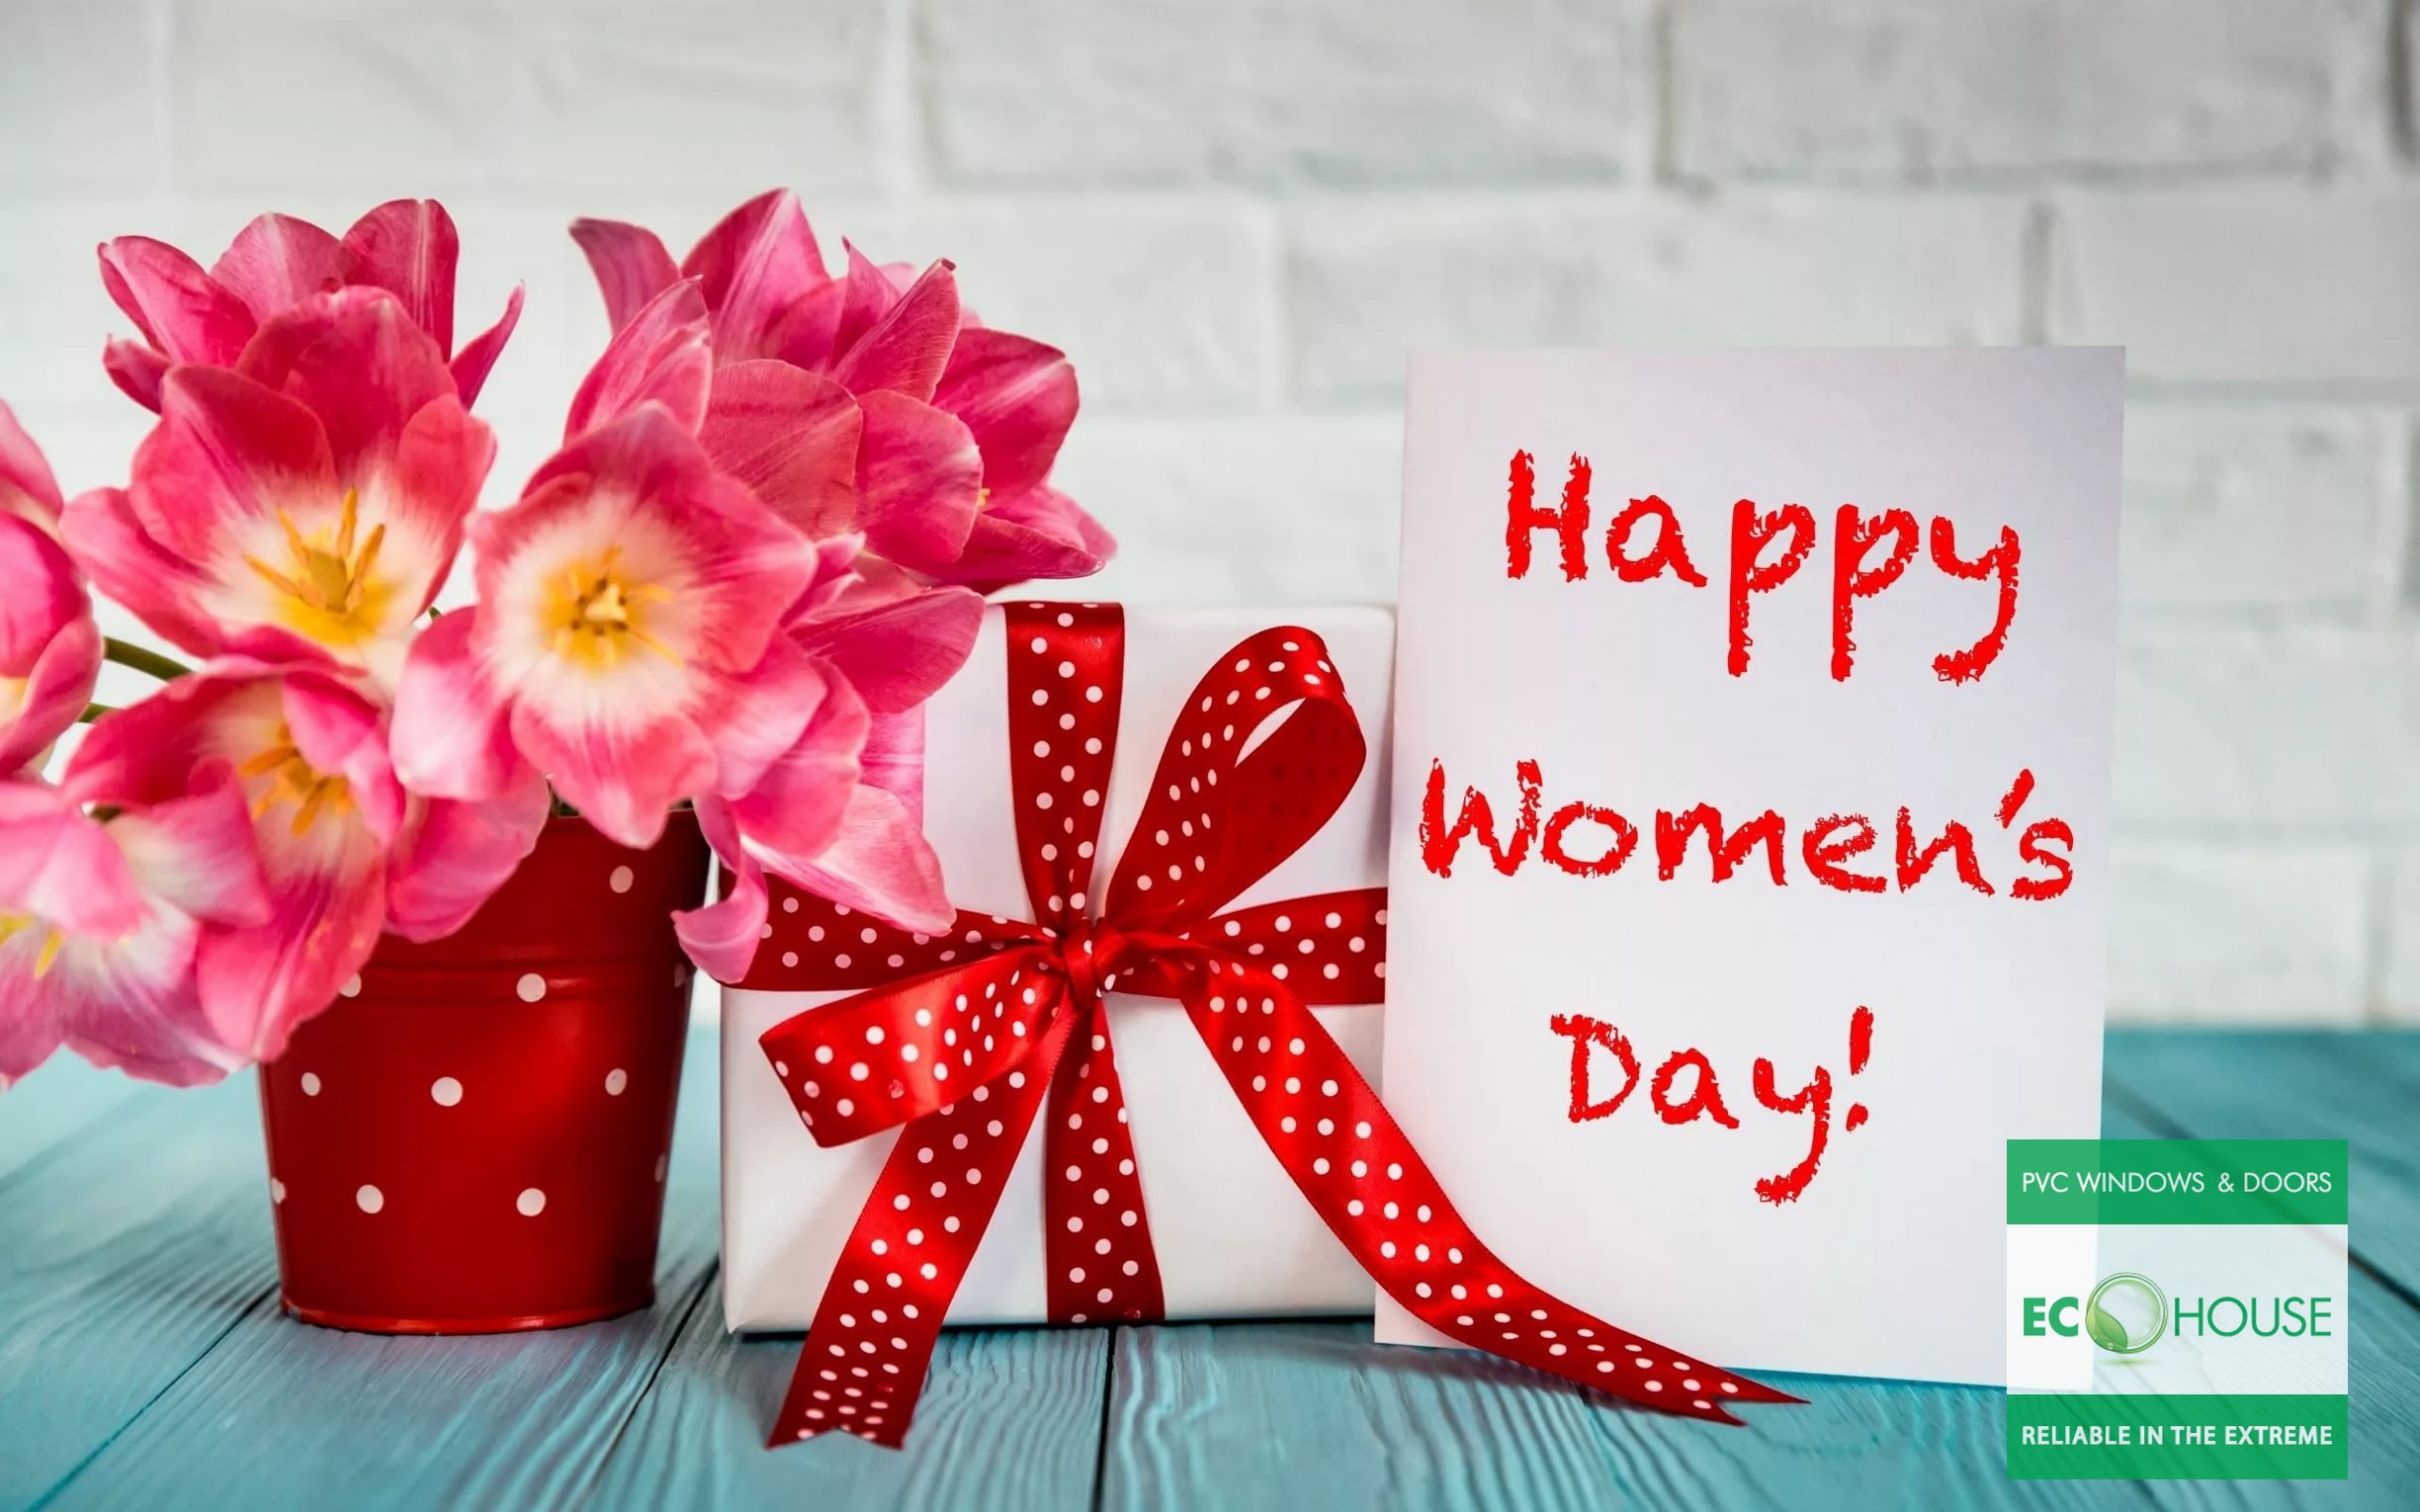 Happy woman's day all 